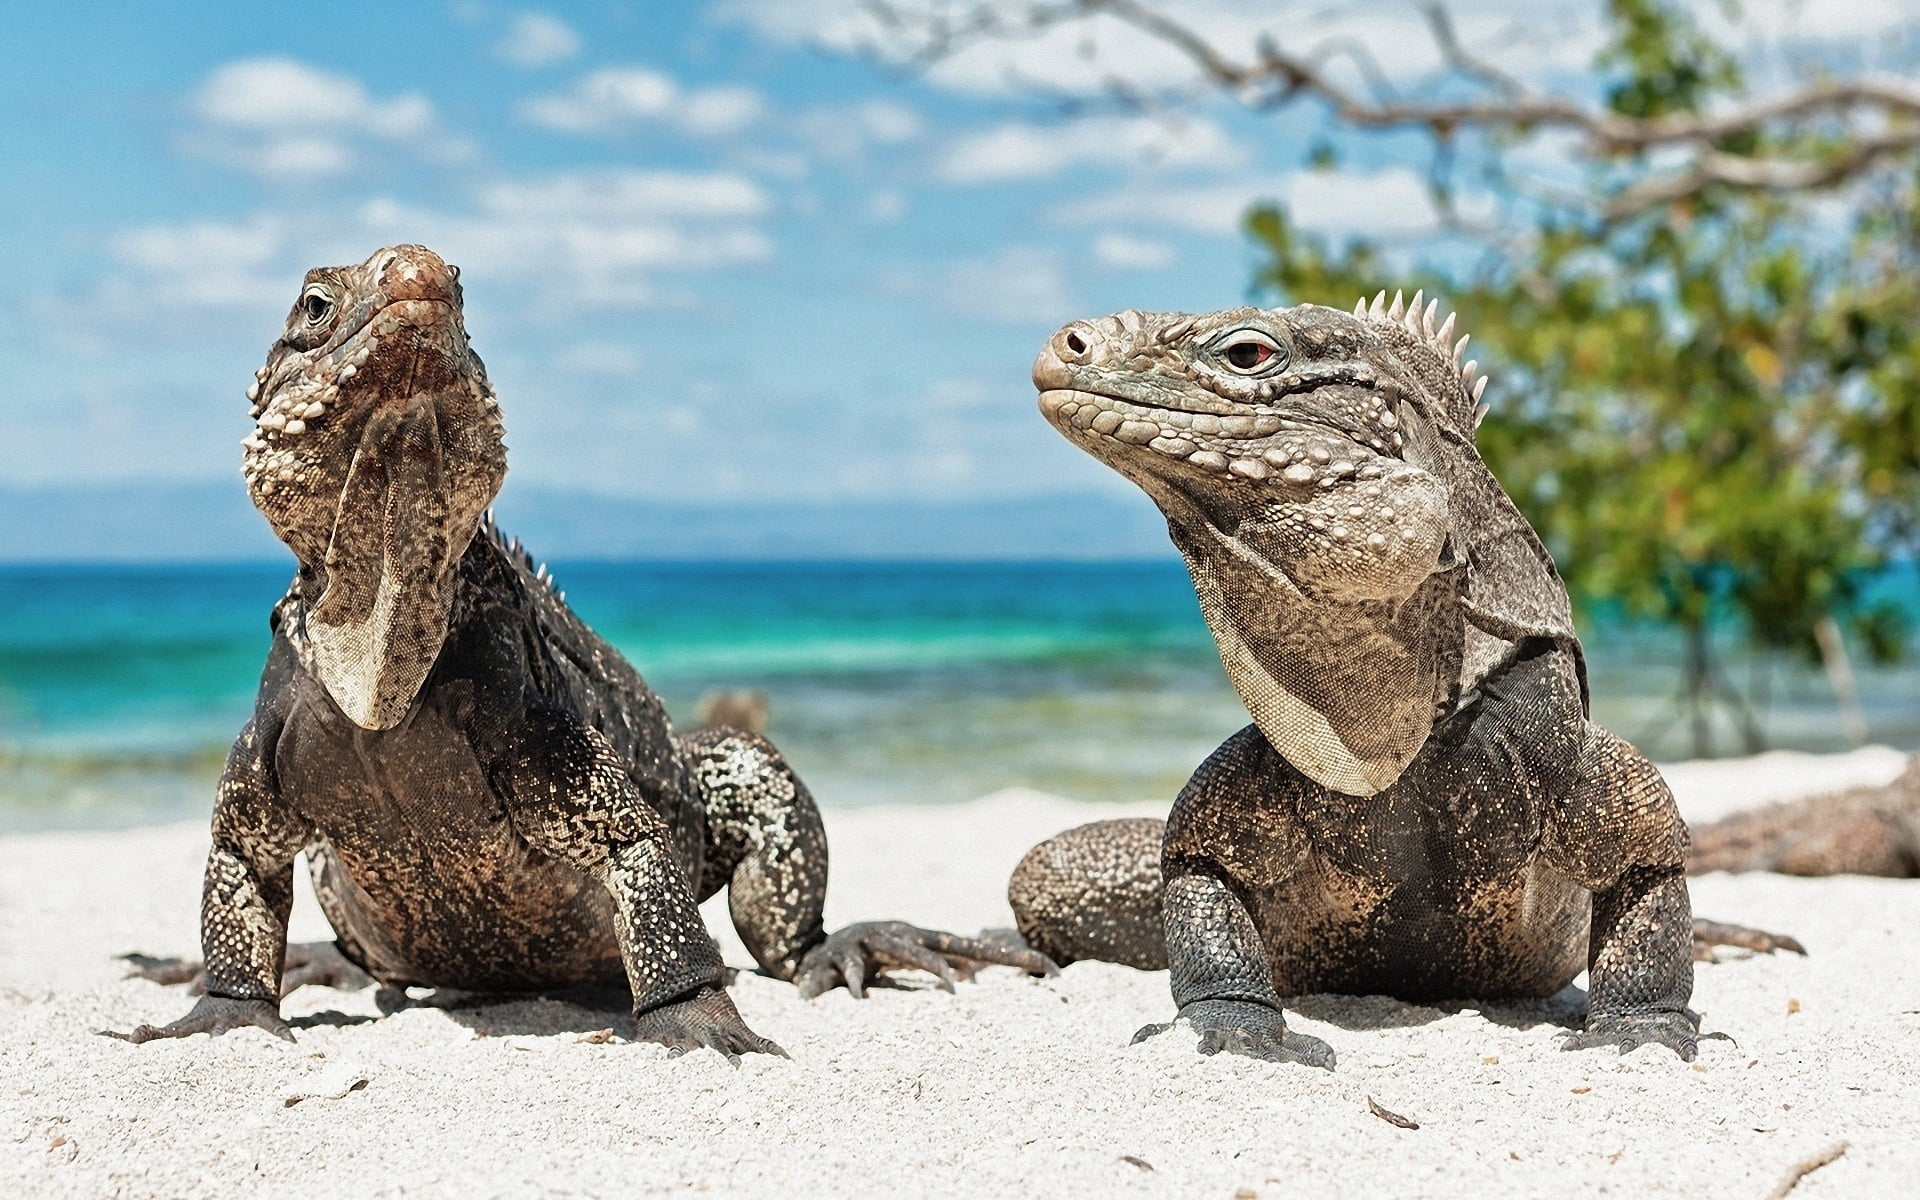 two gray and brown iguanas, reptile, reptiles, animal, nature